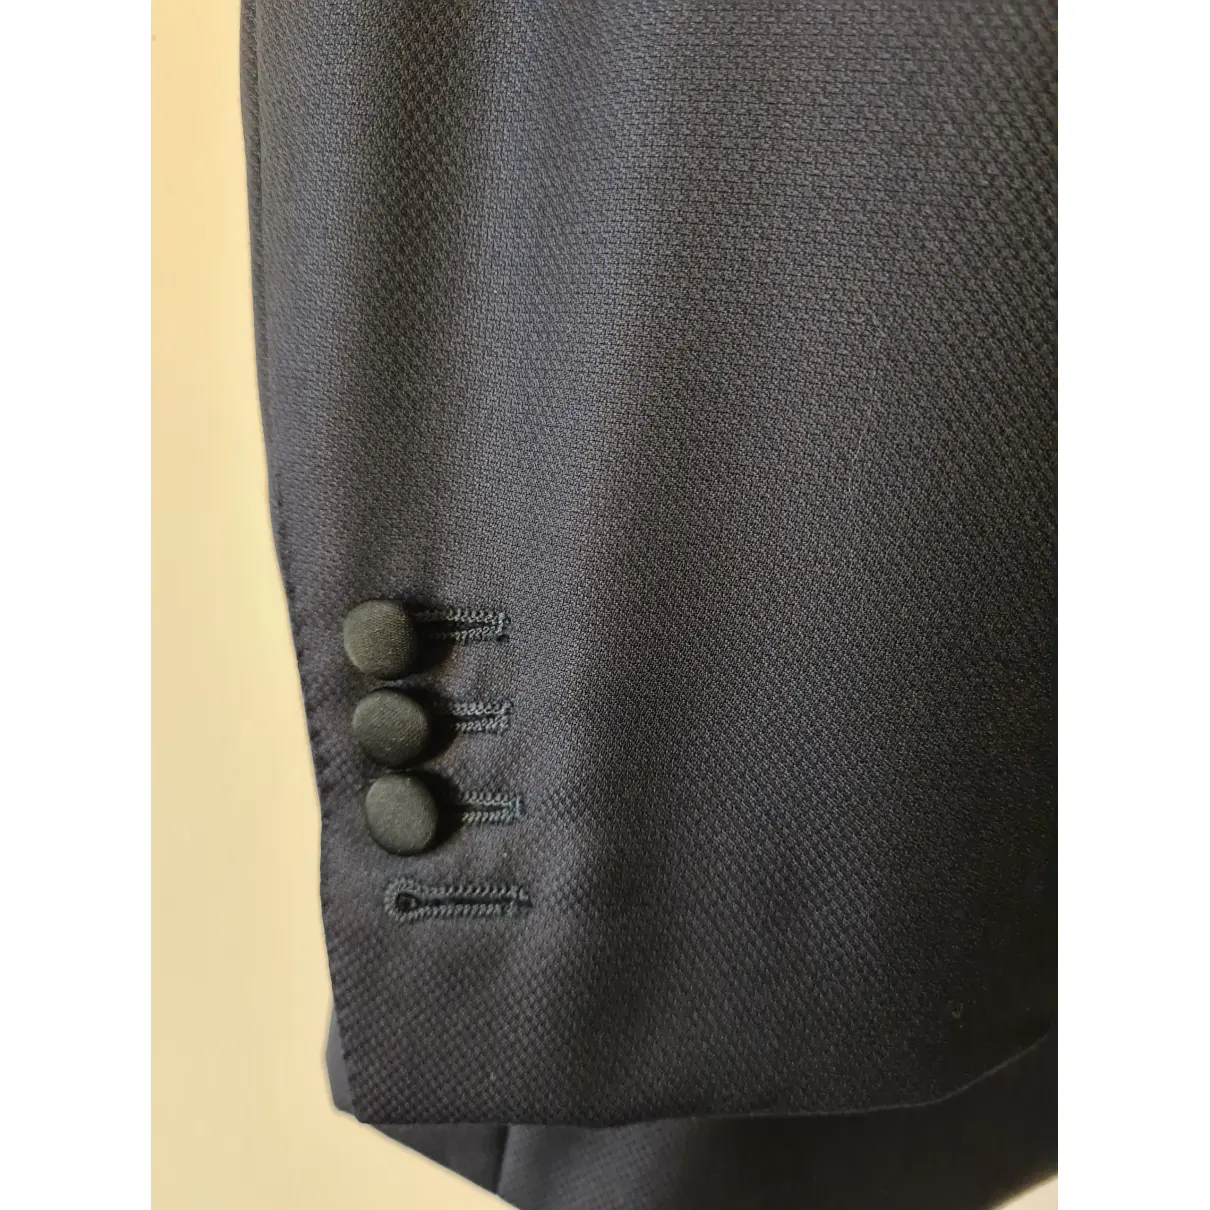 Wool suit Canali